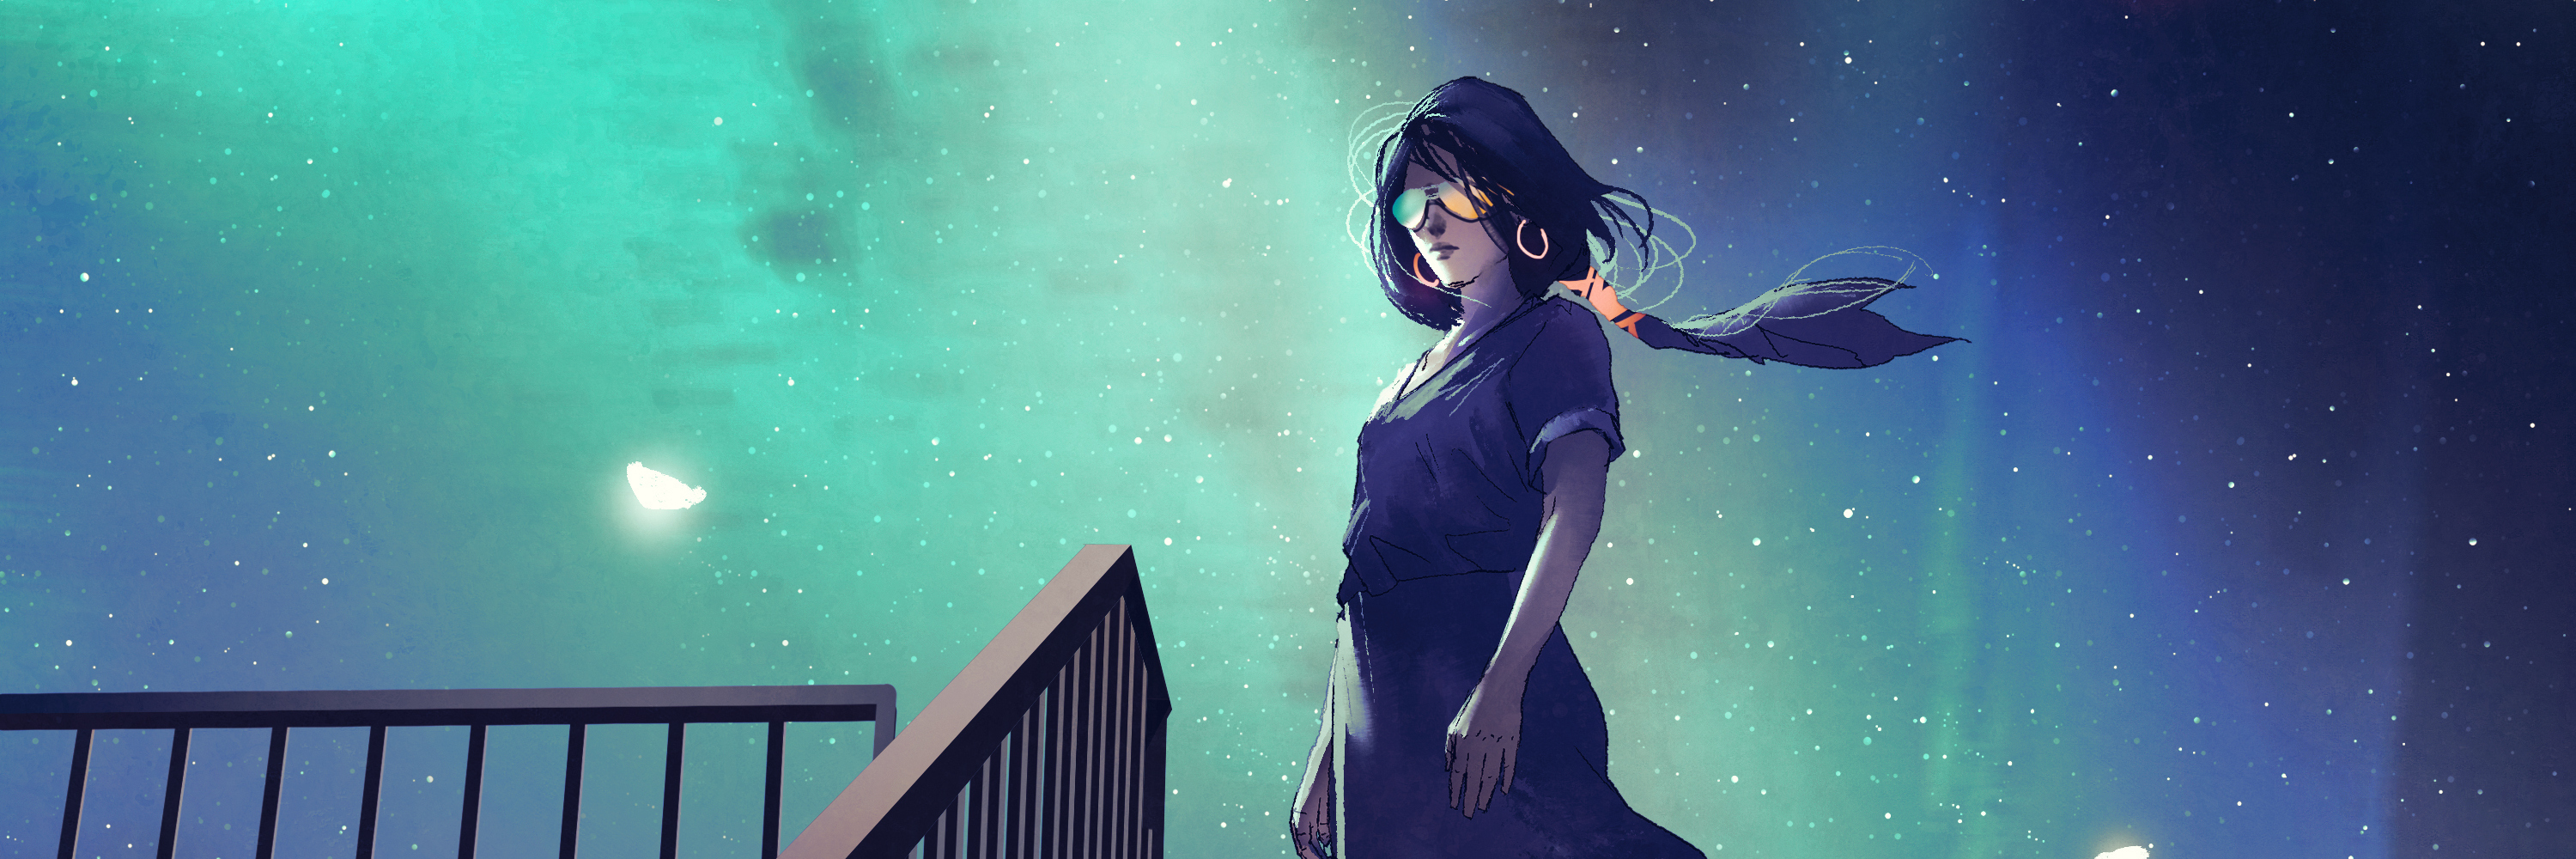 the woman in a dark blue dress standing on stairs against beautiful starry sky with digital art style, illustration painting